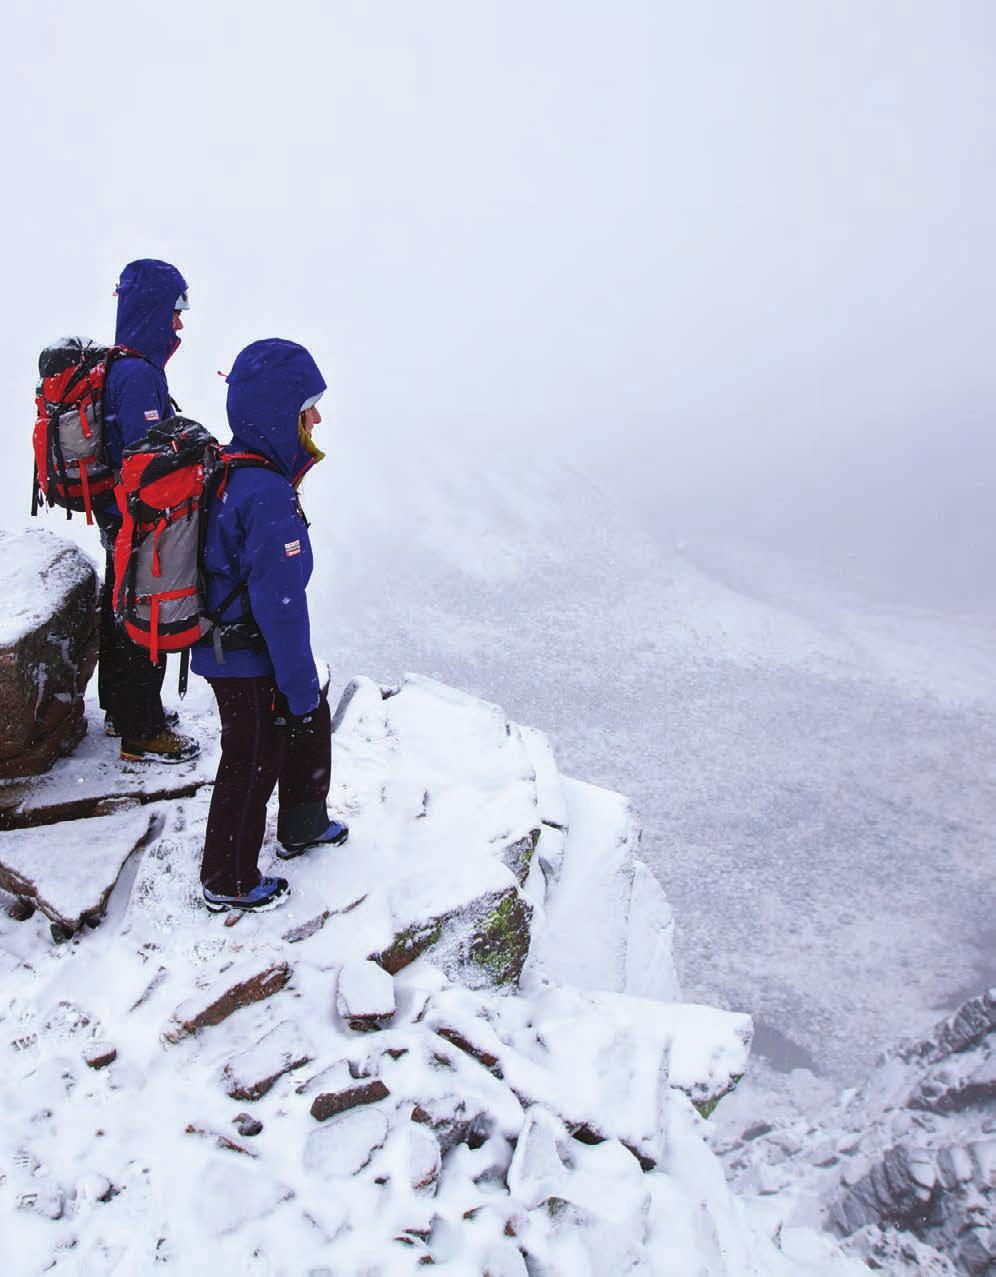 Winter walking & winter skills The mountains in winter become an entirely different prospect.